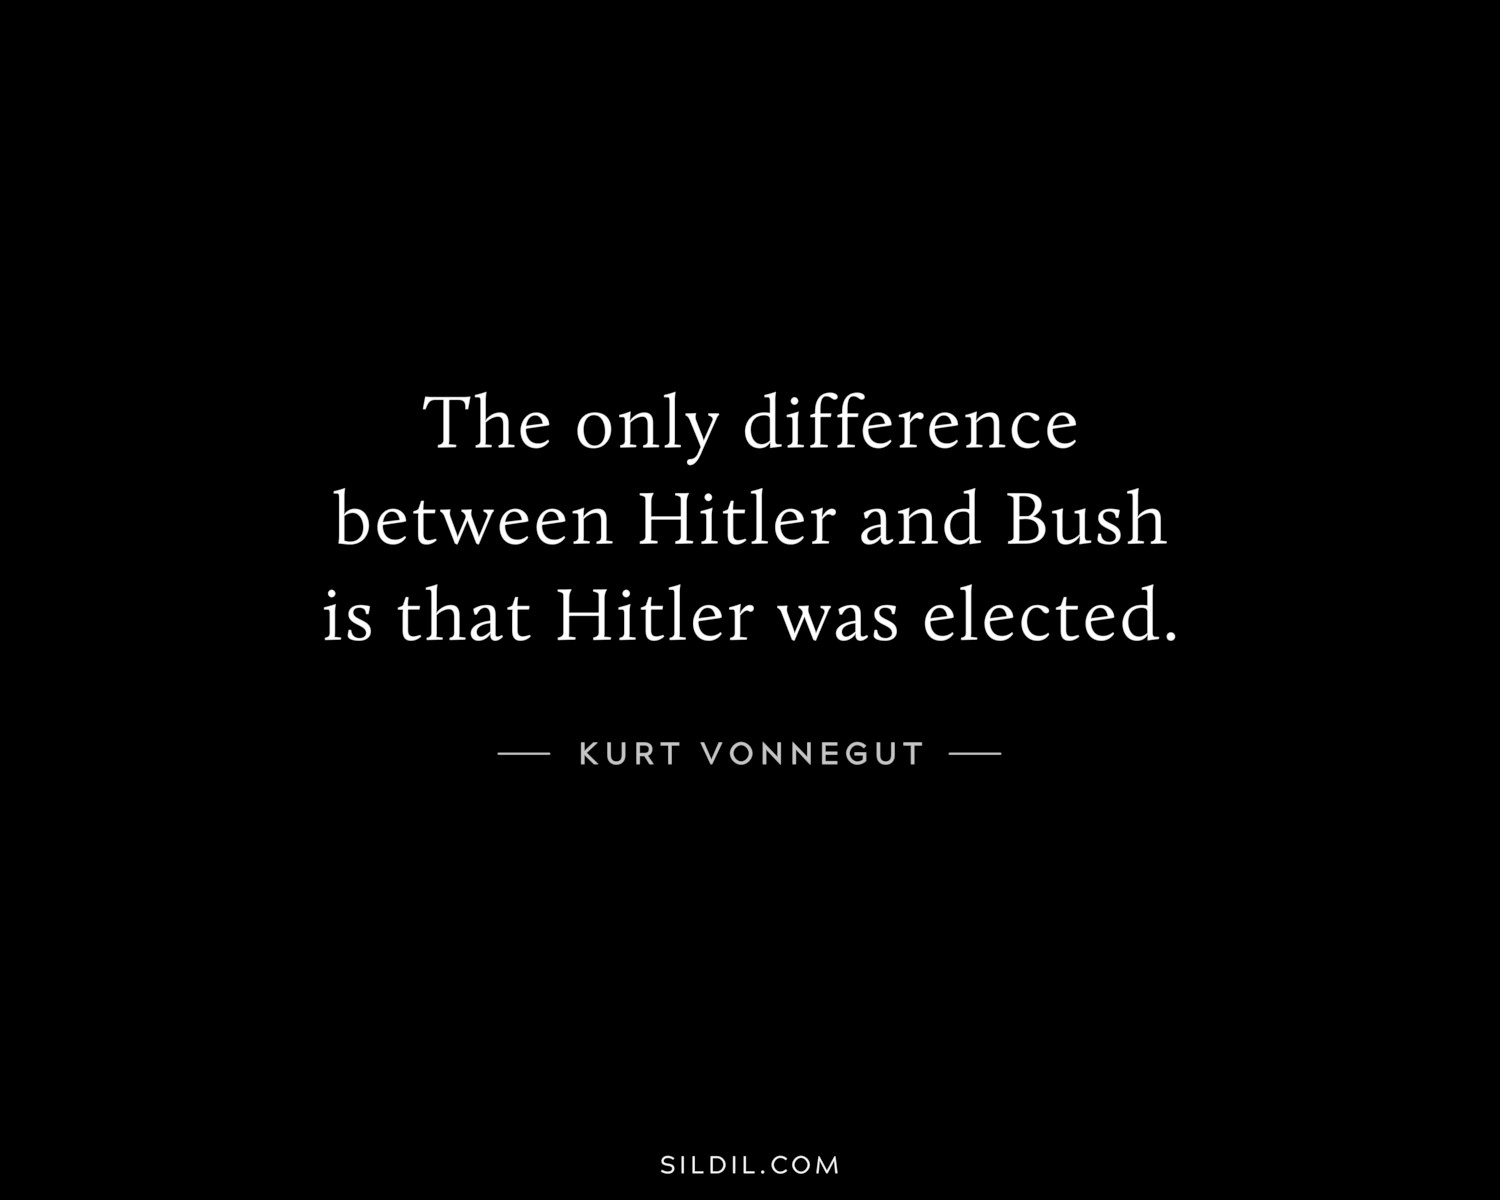 The only difference between Hitler and Bush is that Hitler was elected.